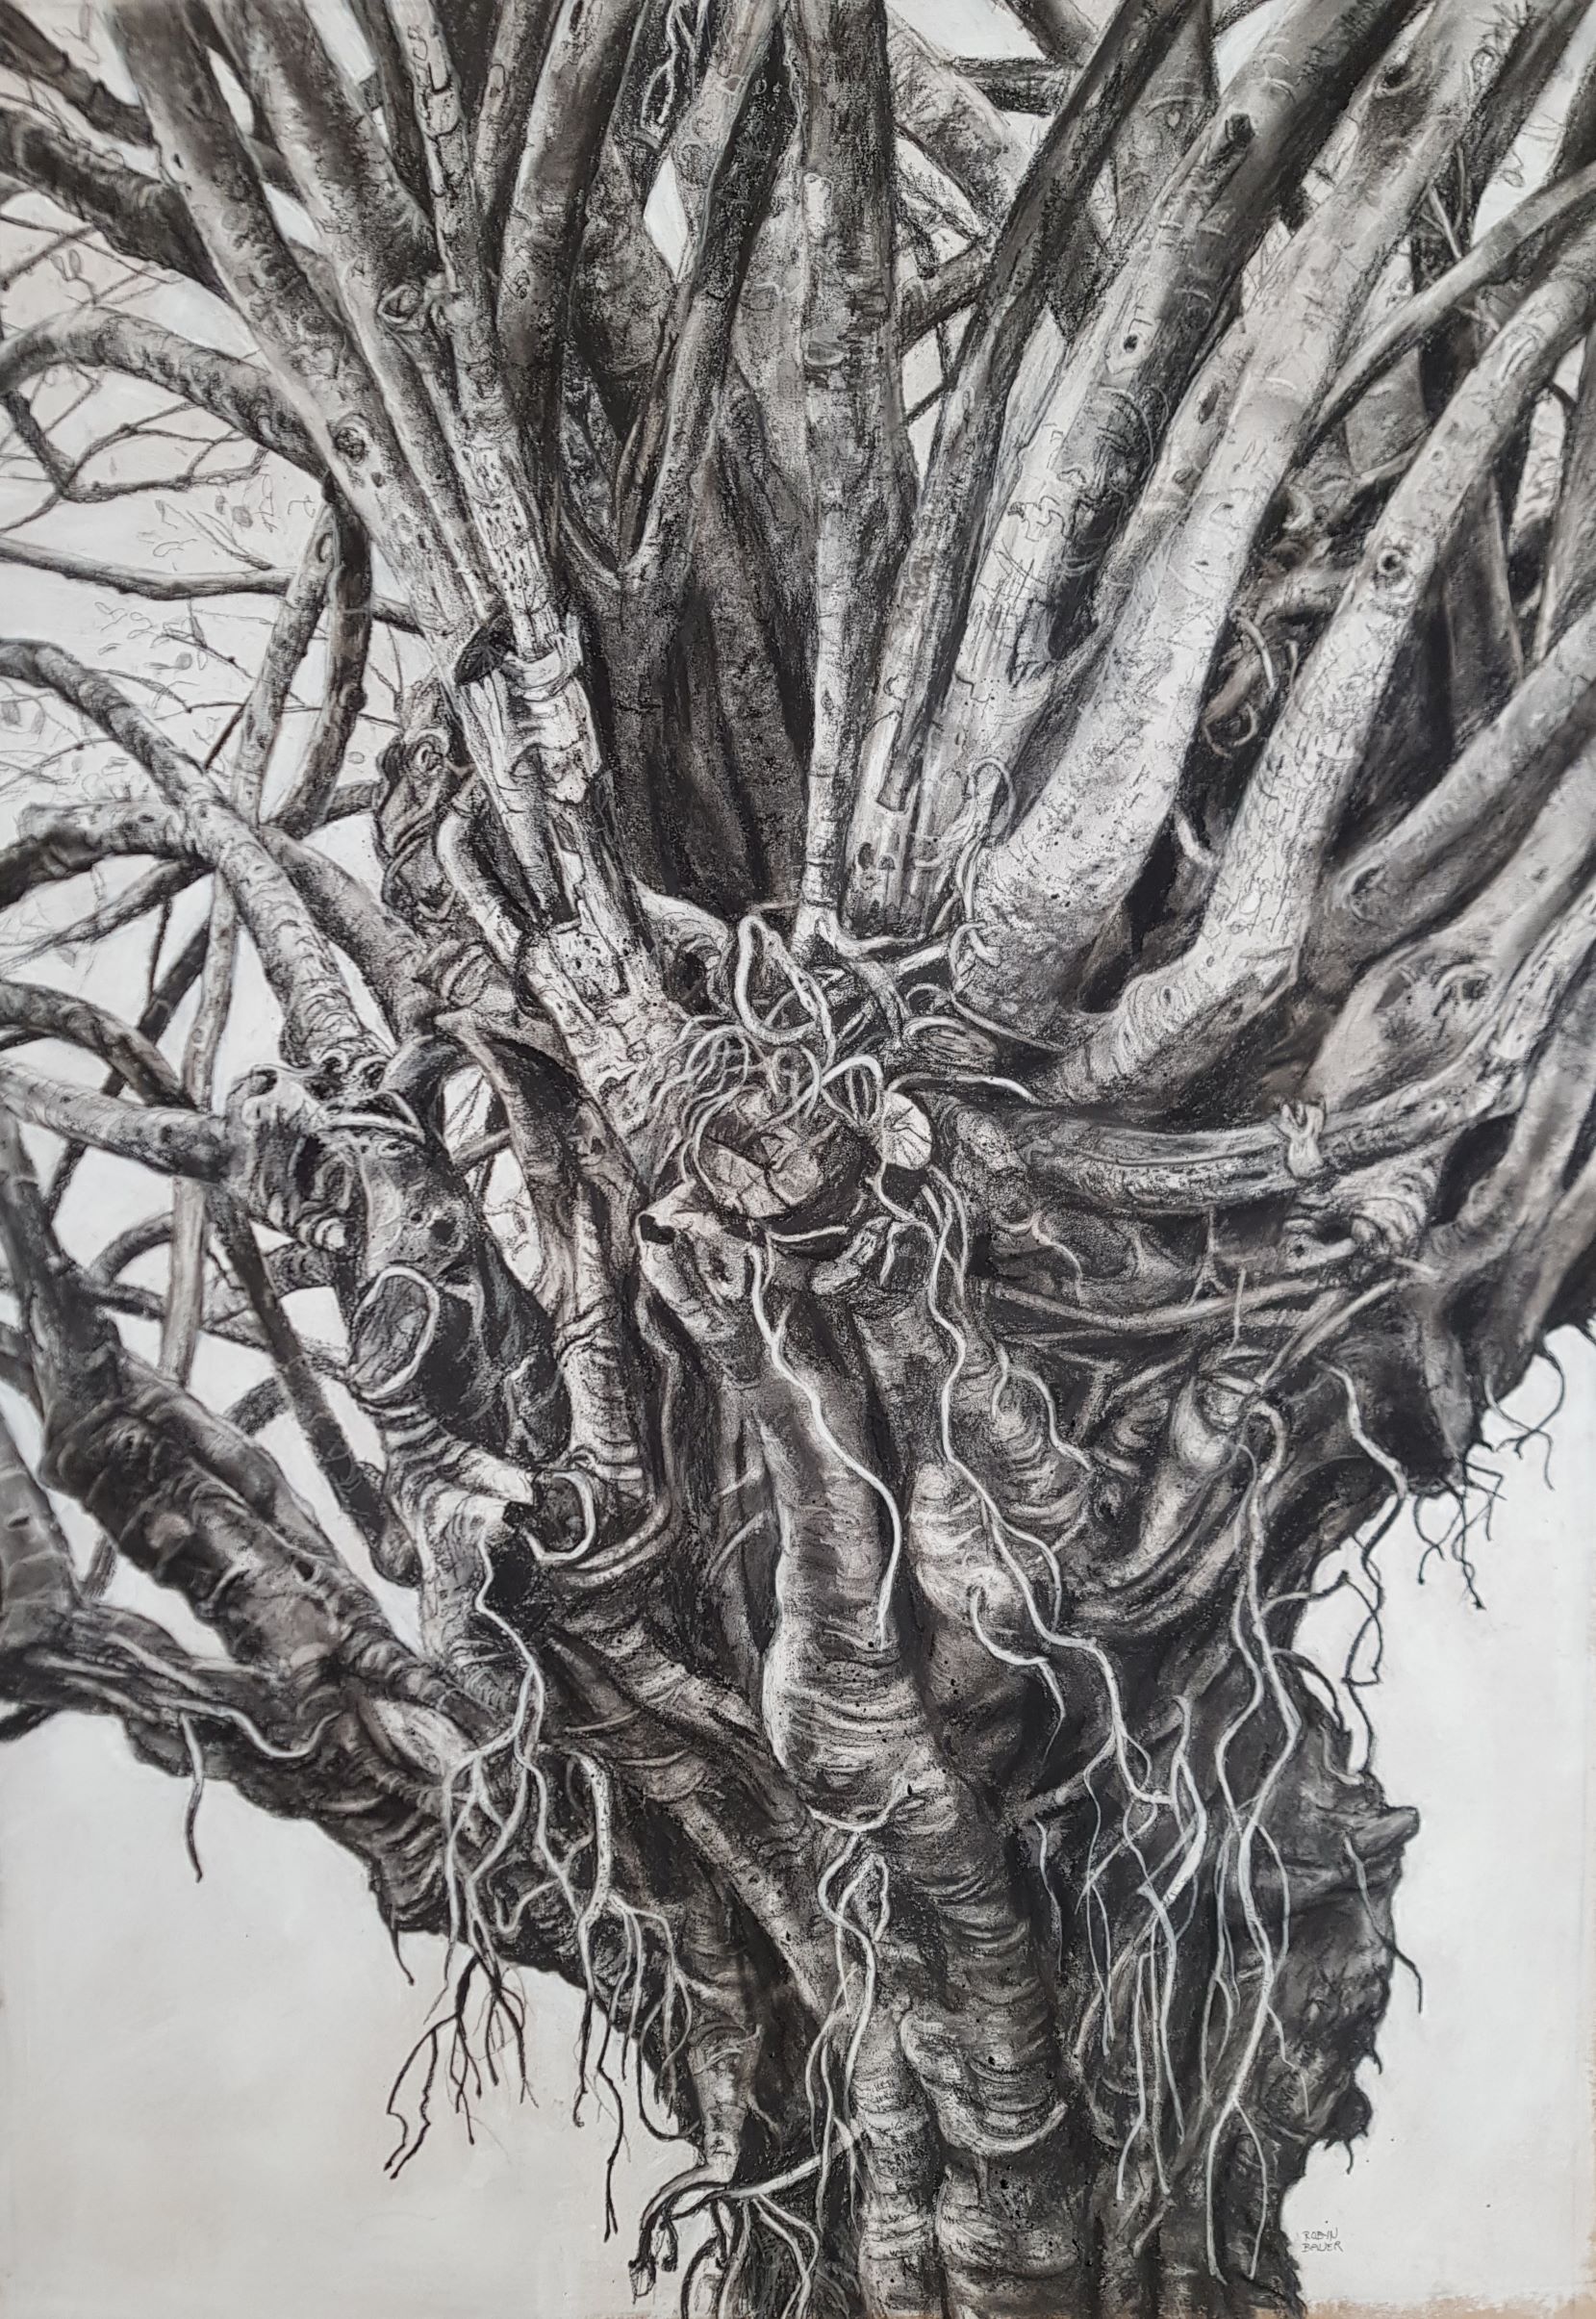 Aged Fig Tree - Beauty is Truth by Robyn Bauer | Lethbridge Landscape Prize 2021 Finalists | Lethbridge Gallery